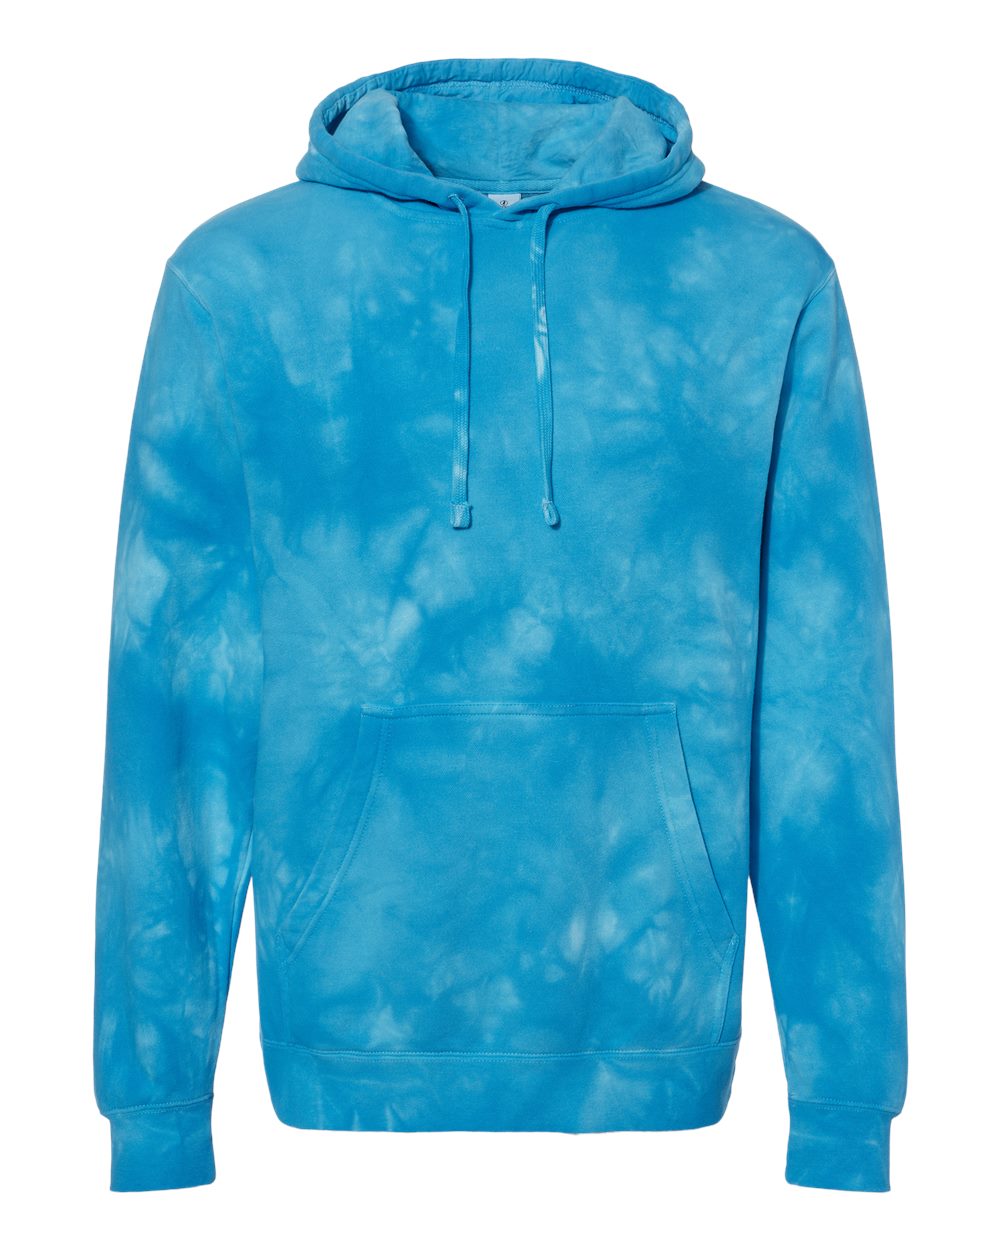 Independent Trading Co. PRM4500TD Unisex Midweight Tie-Dyed Hooded ...